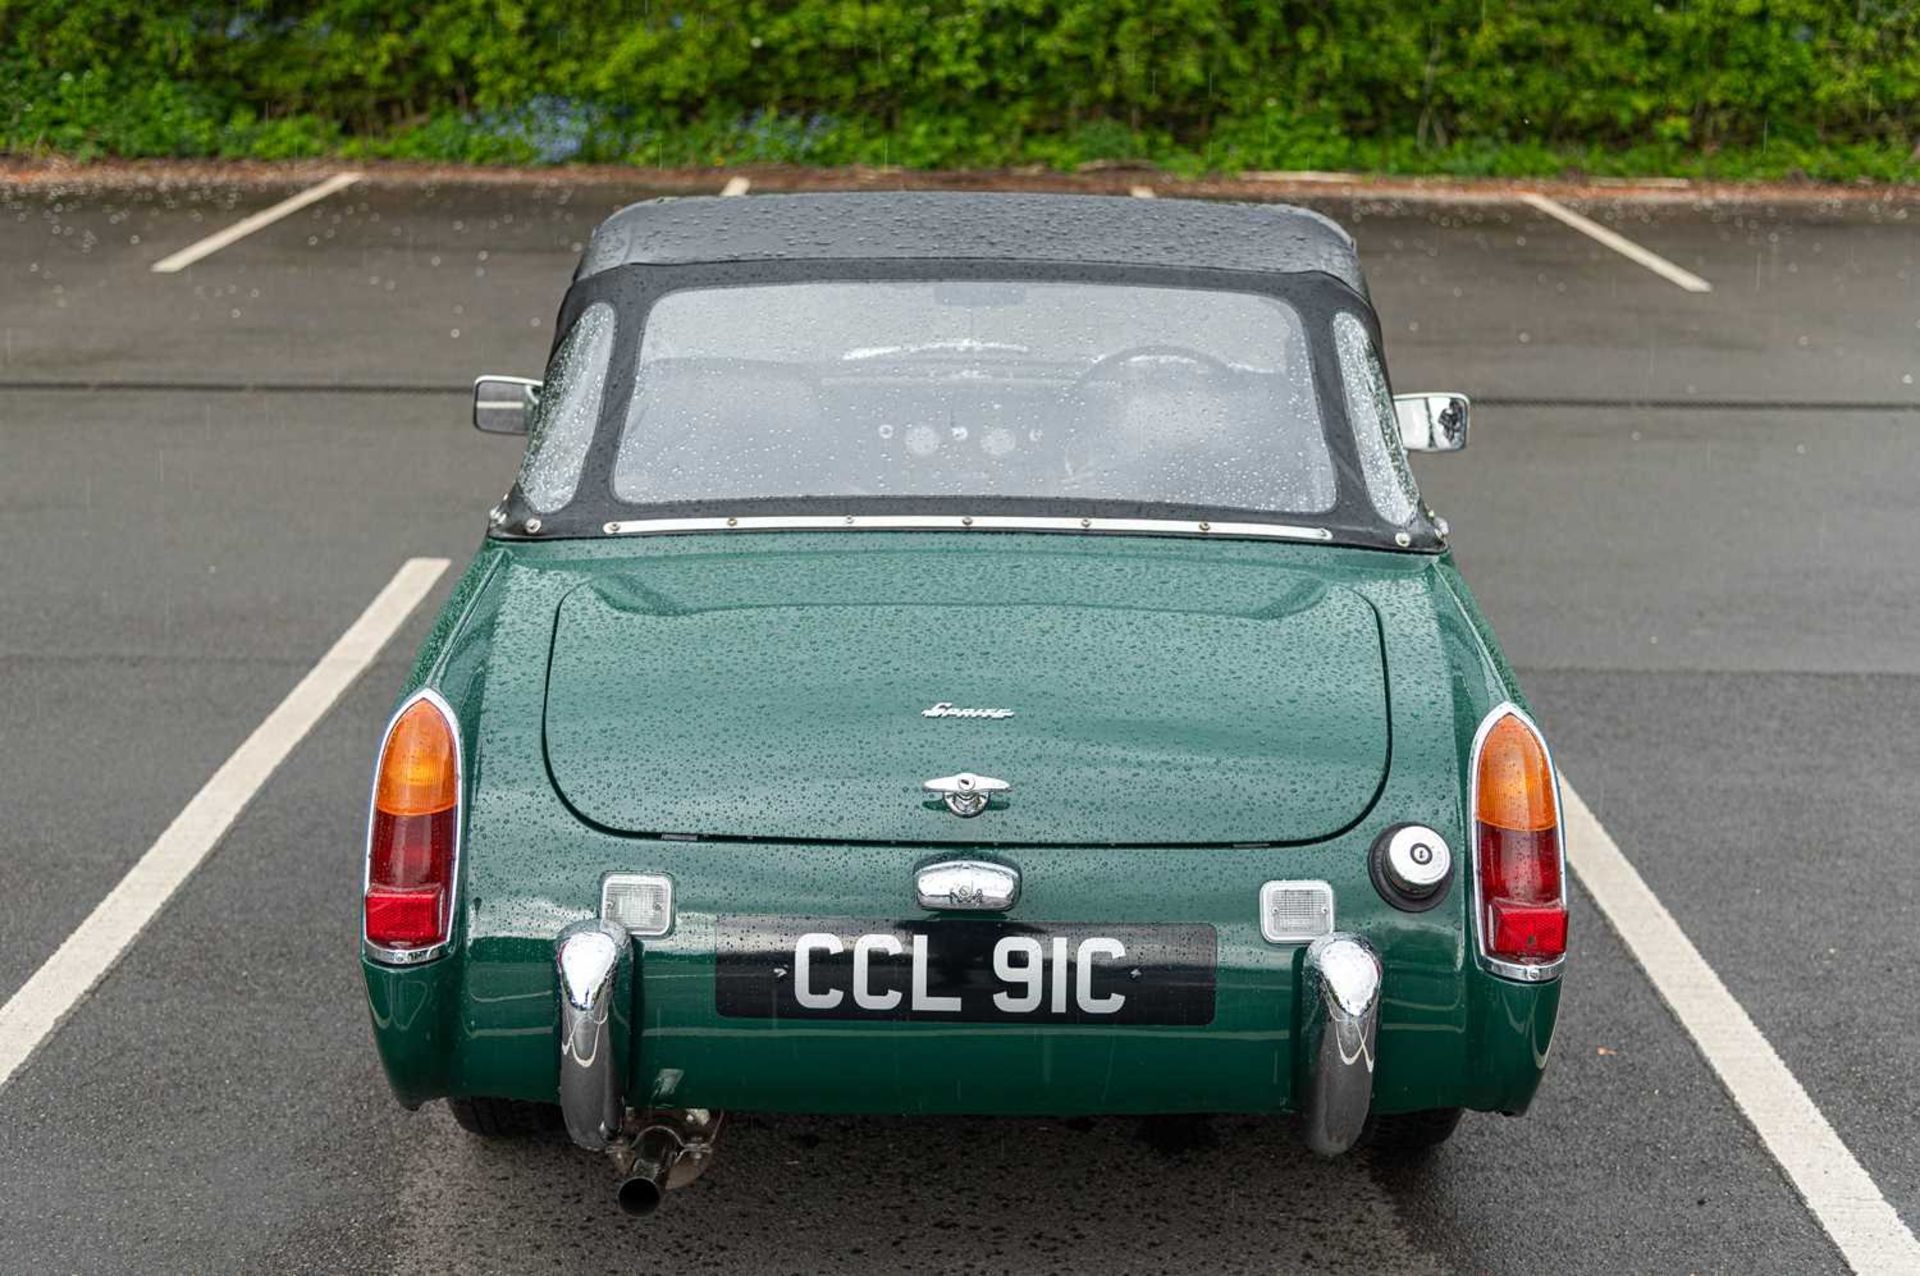 1965 Austin-Healey Sprite Formerly the property of British Formula One racing driver David Piper - Image 4 of 71